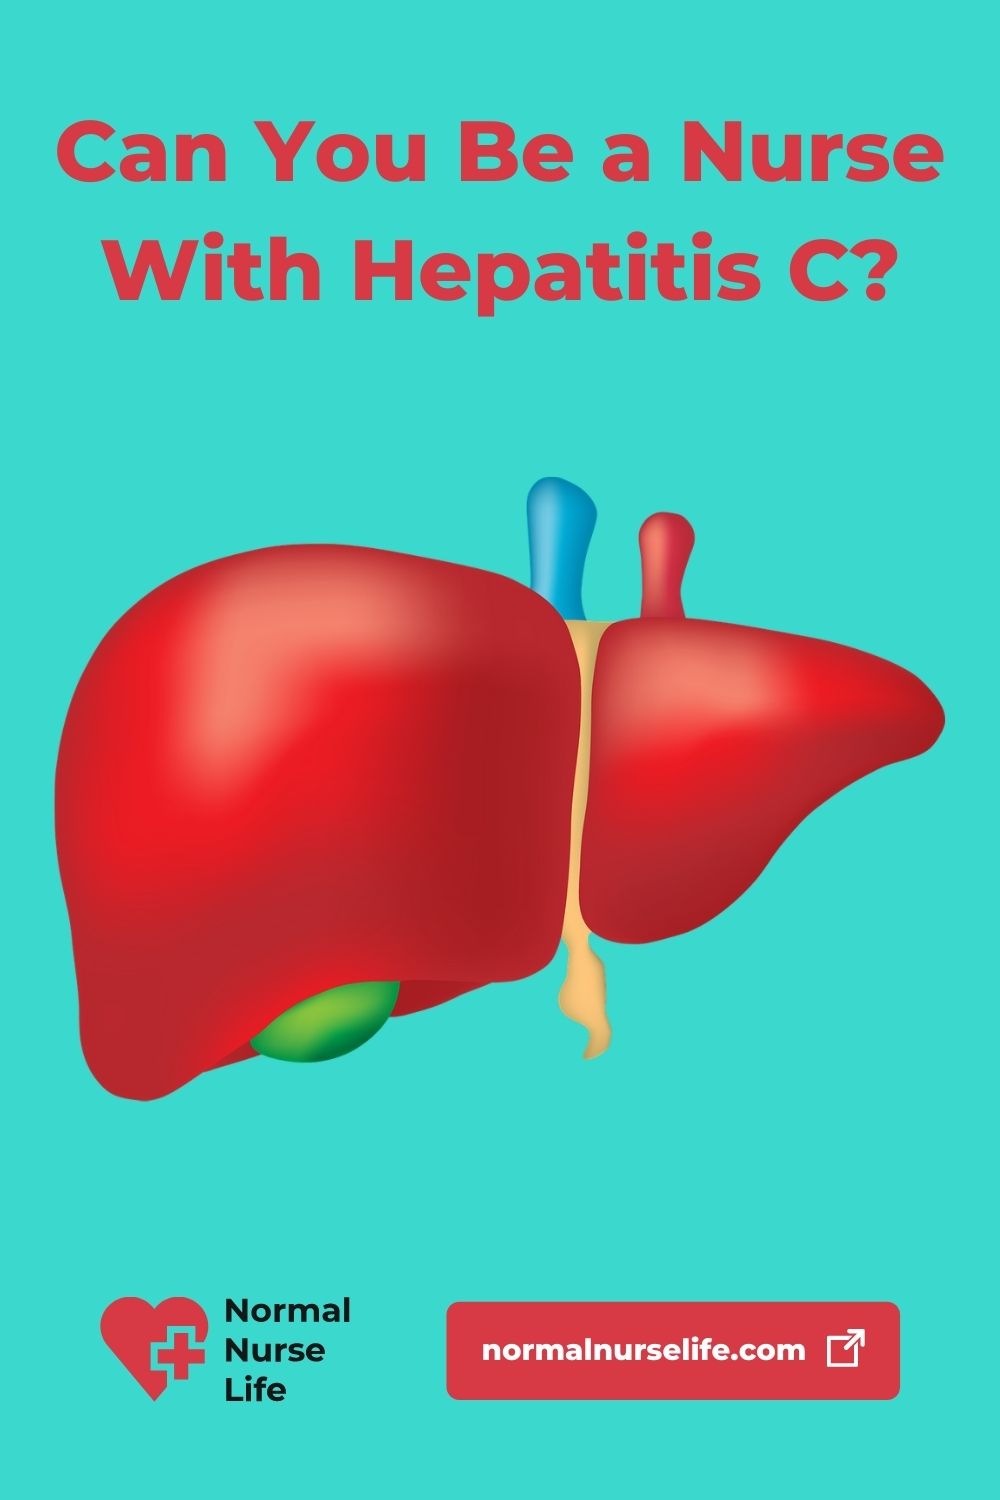 Can you be a nurse with hepatitis C?